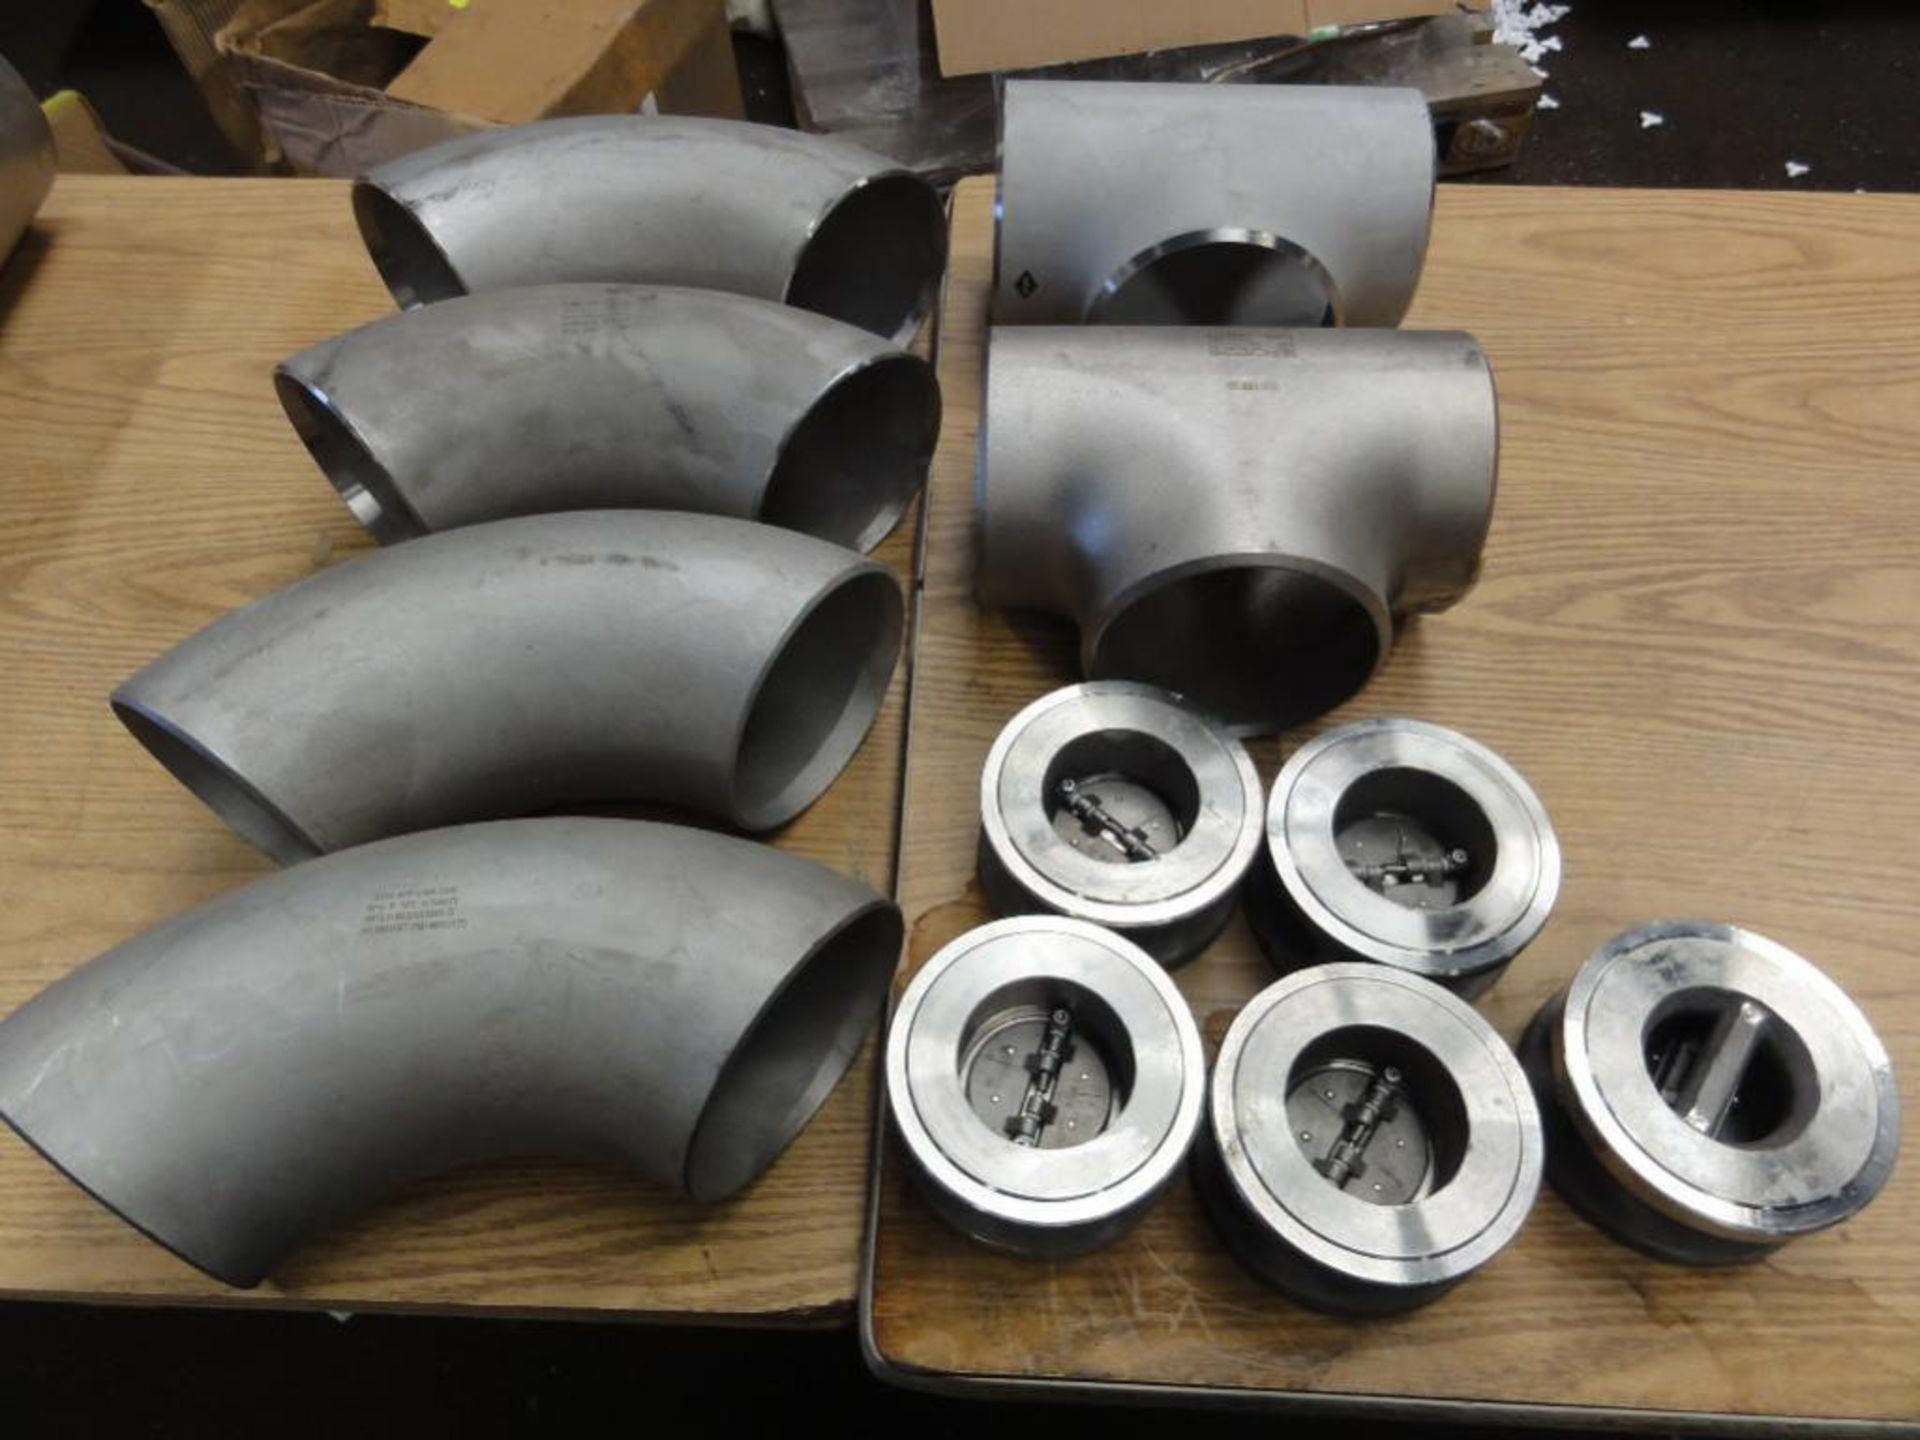 NEW Assorted 6" Stainless Steel Elbows and Tee, 3" Valves, see pictures for part numbers and specs